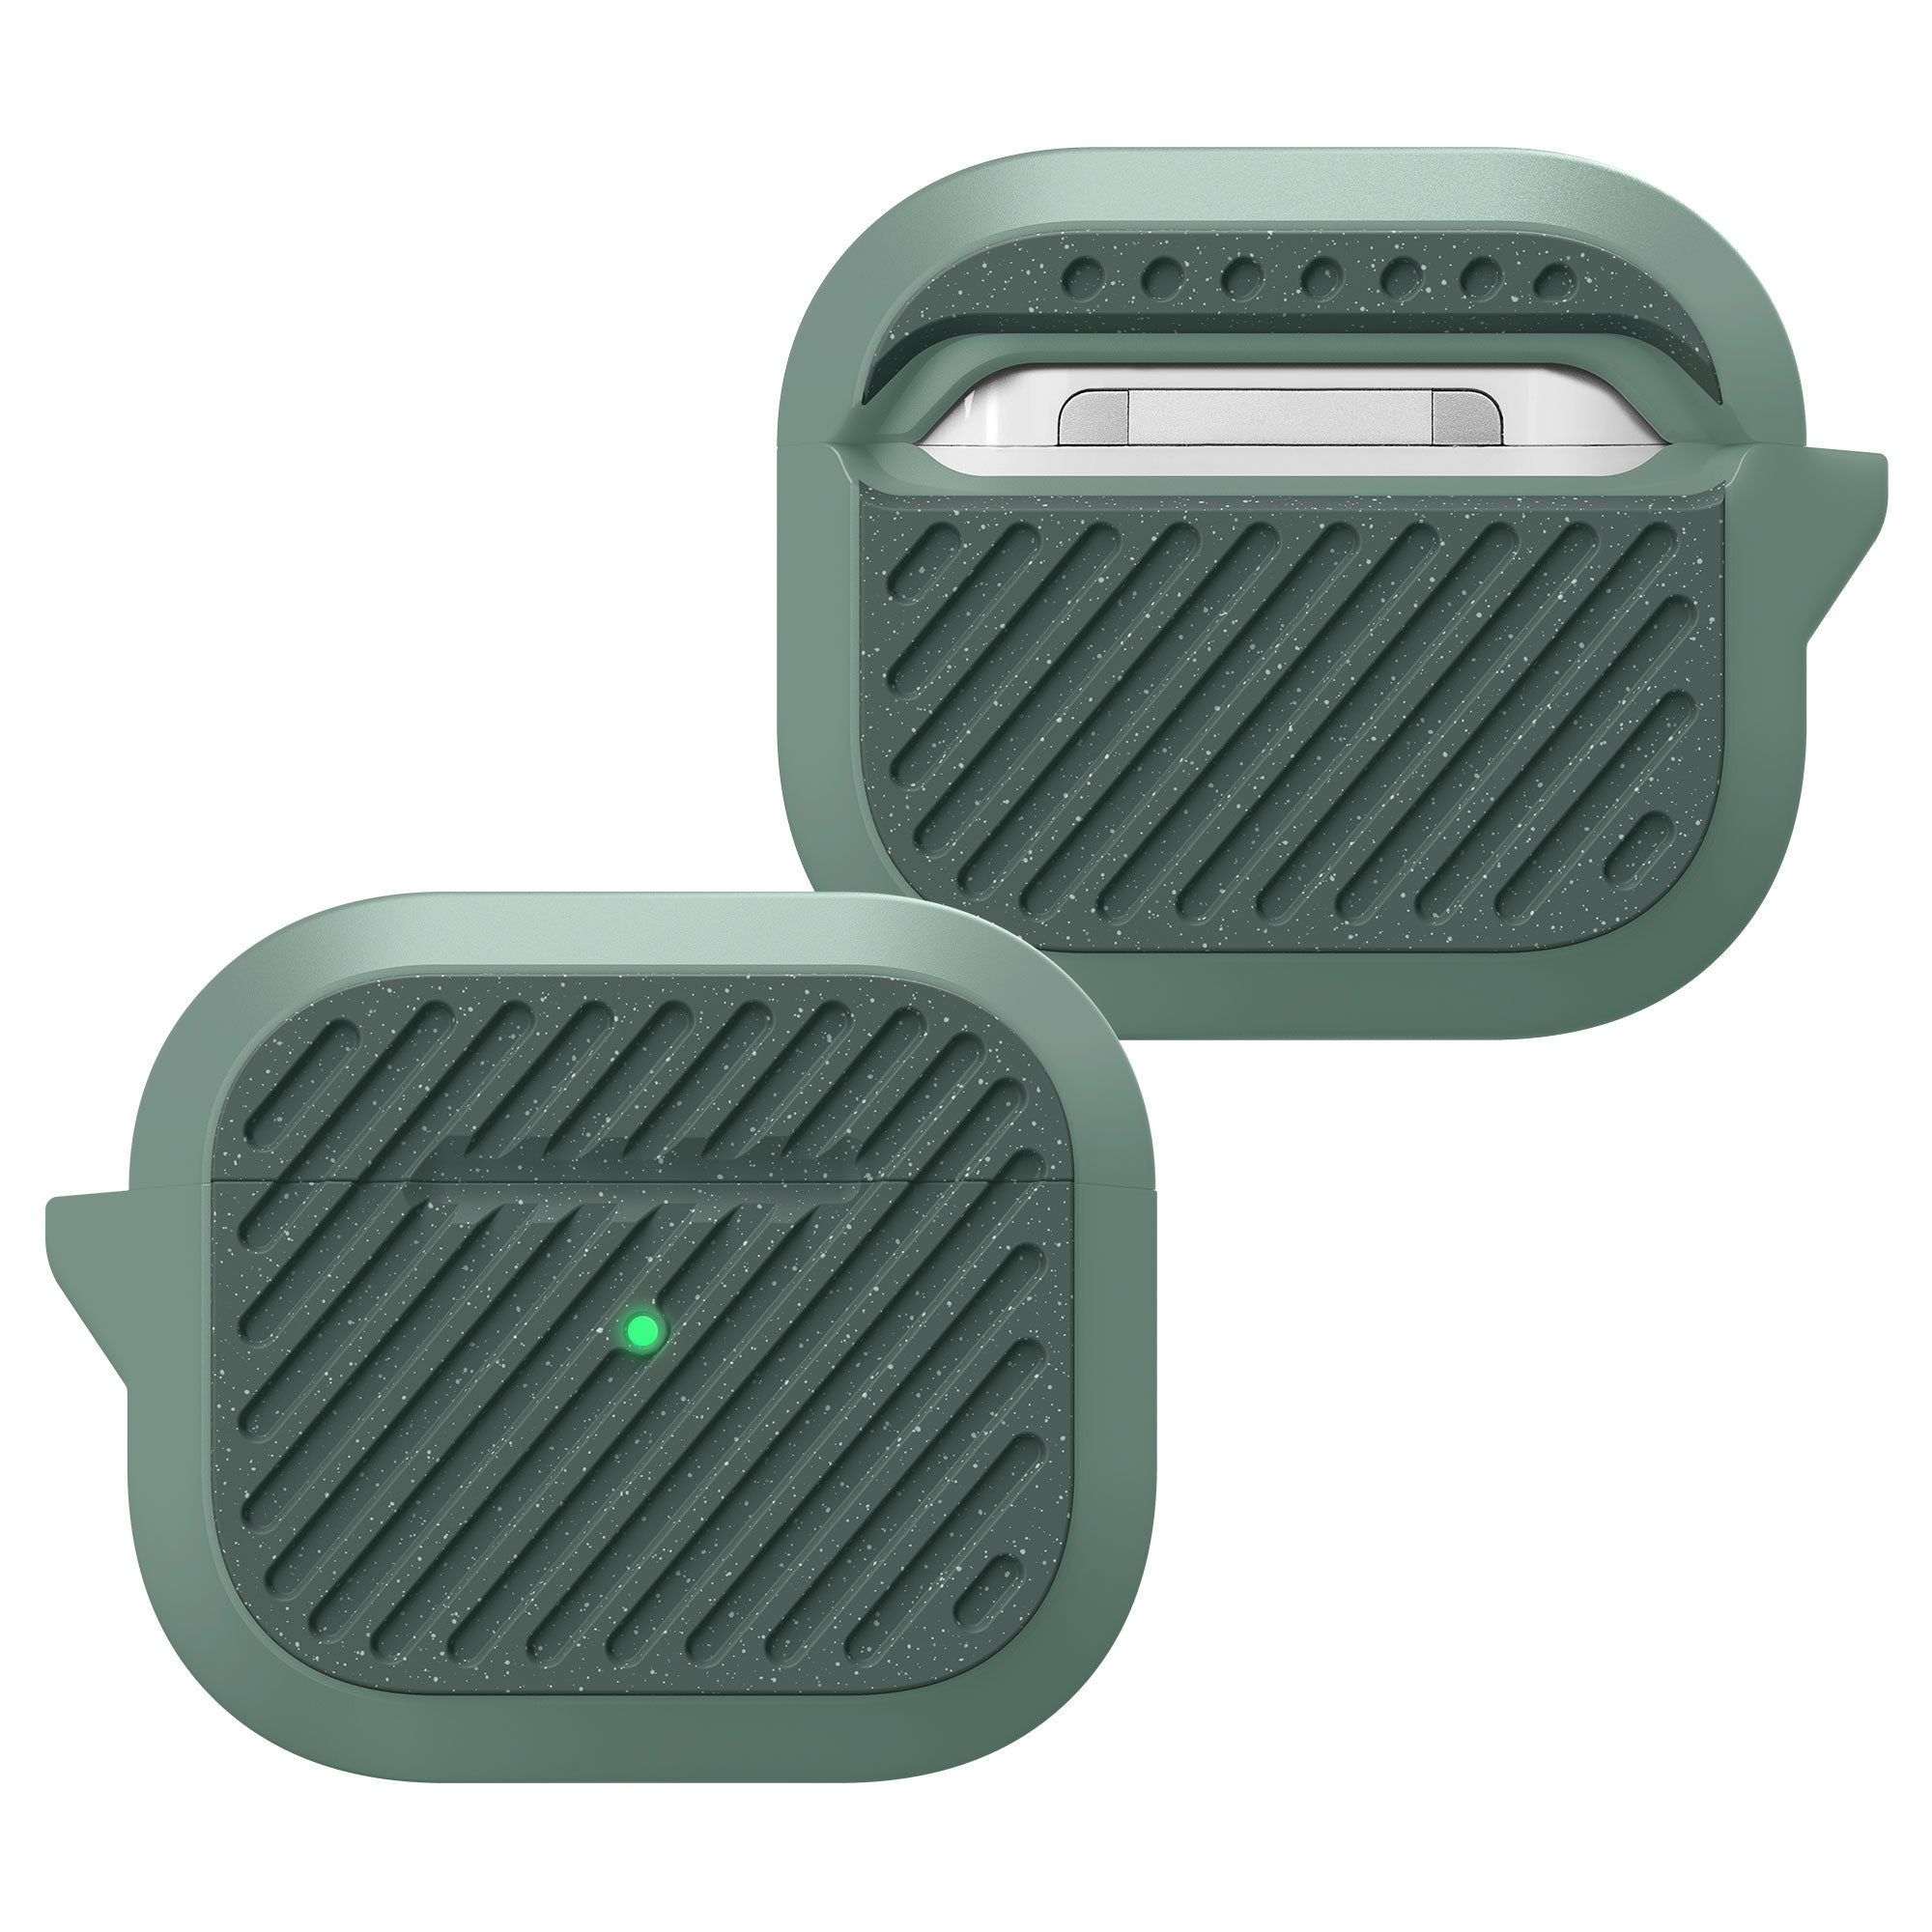 CAPSULE IMPKT case for AirPods 3